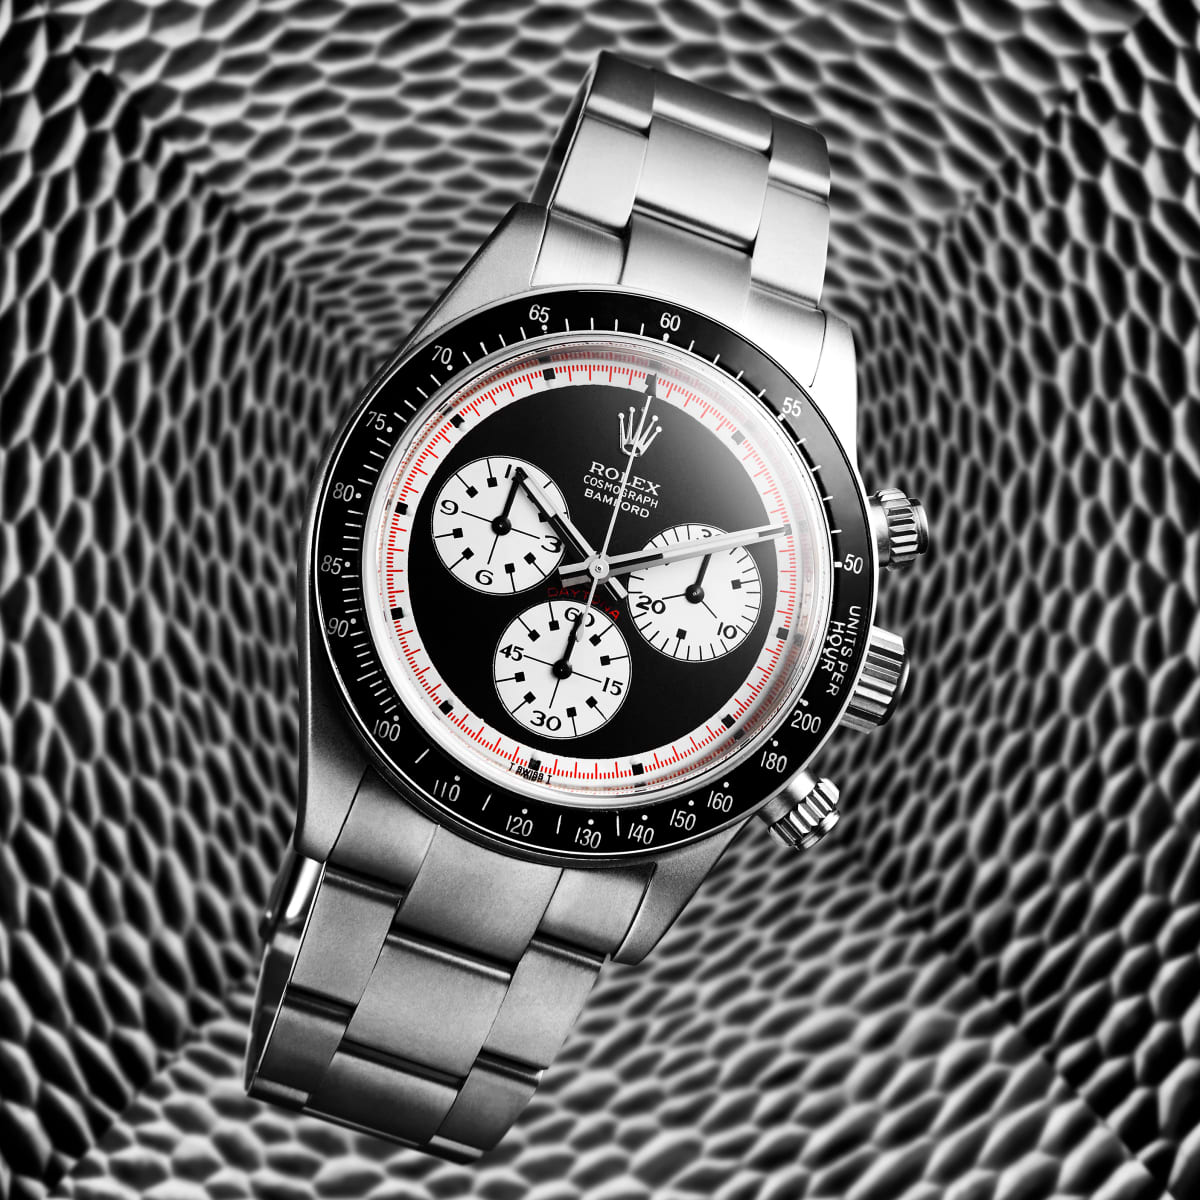 Bamford Watch Department's Heritage Series pays homage to the Rolex Daytona  - Acquire